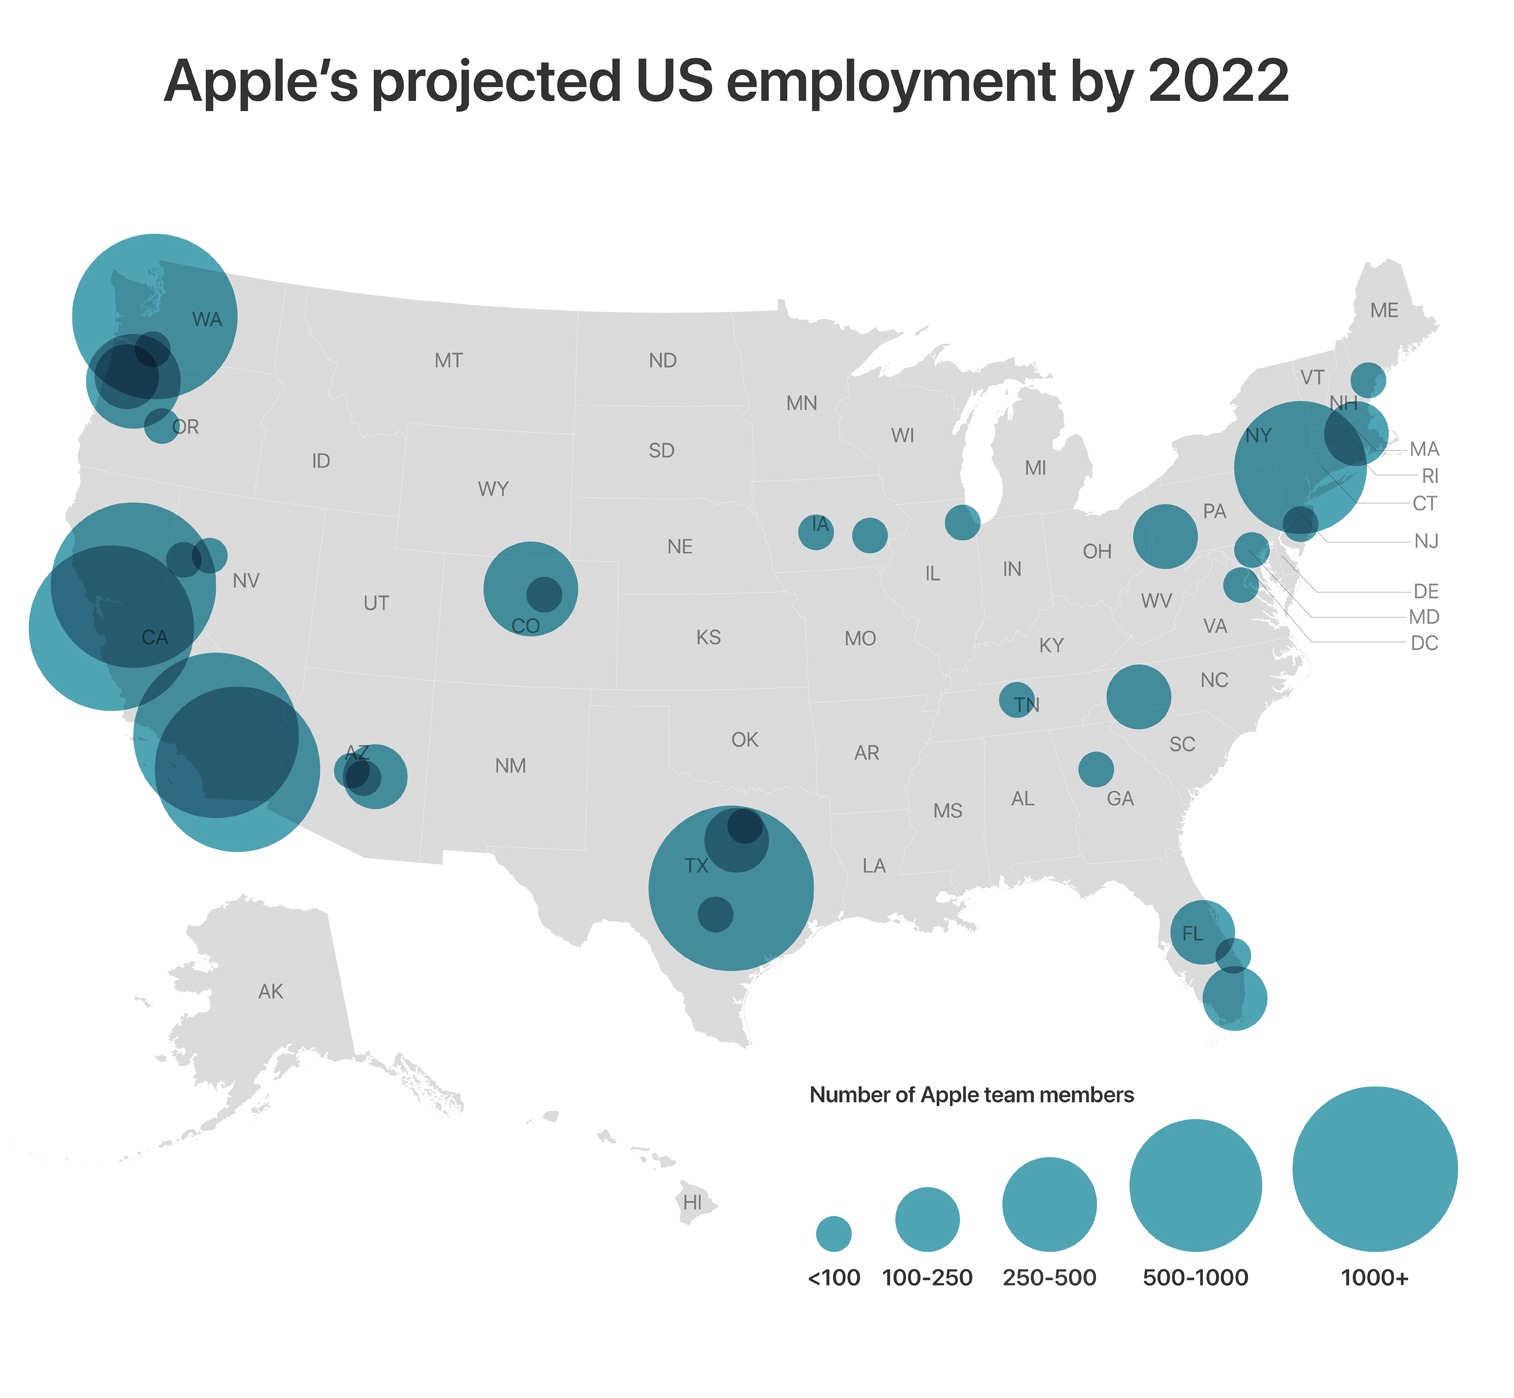 Apple to build a new campus in Austin, add jobs across the U.S.